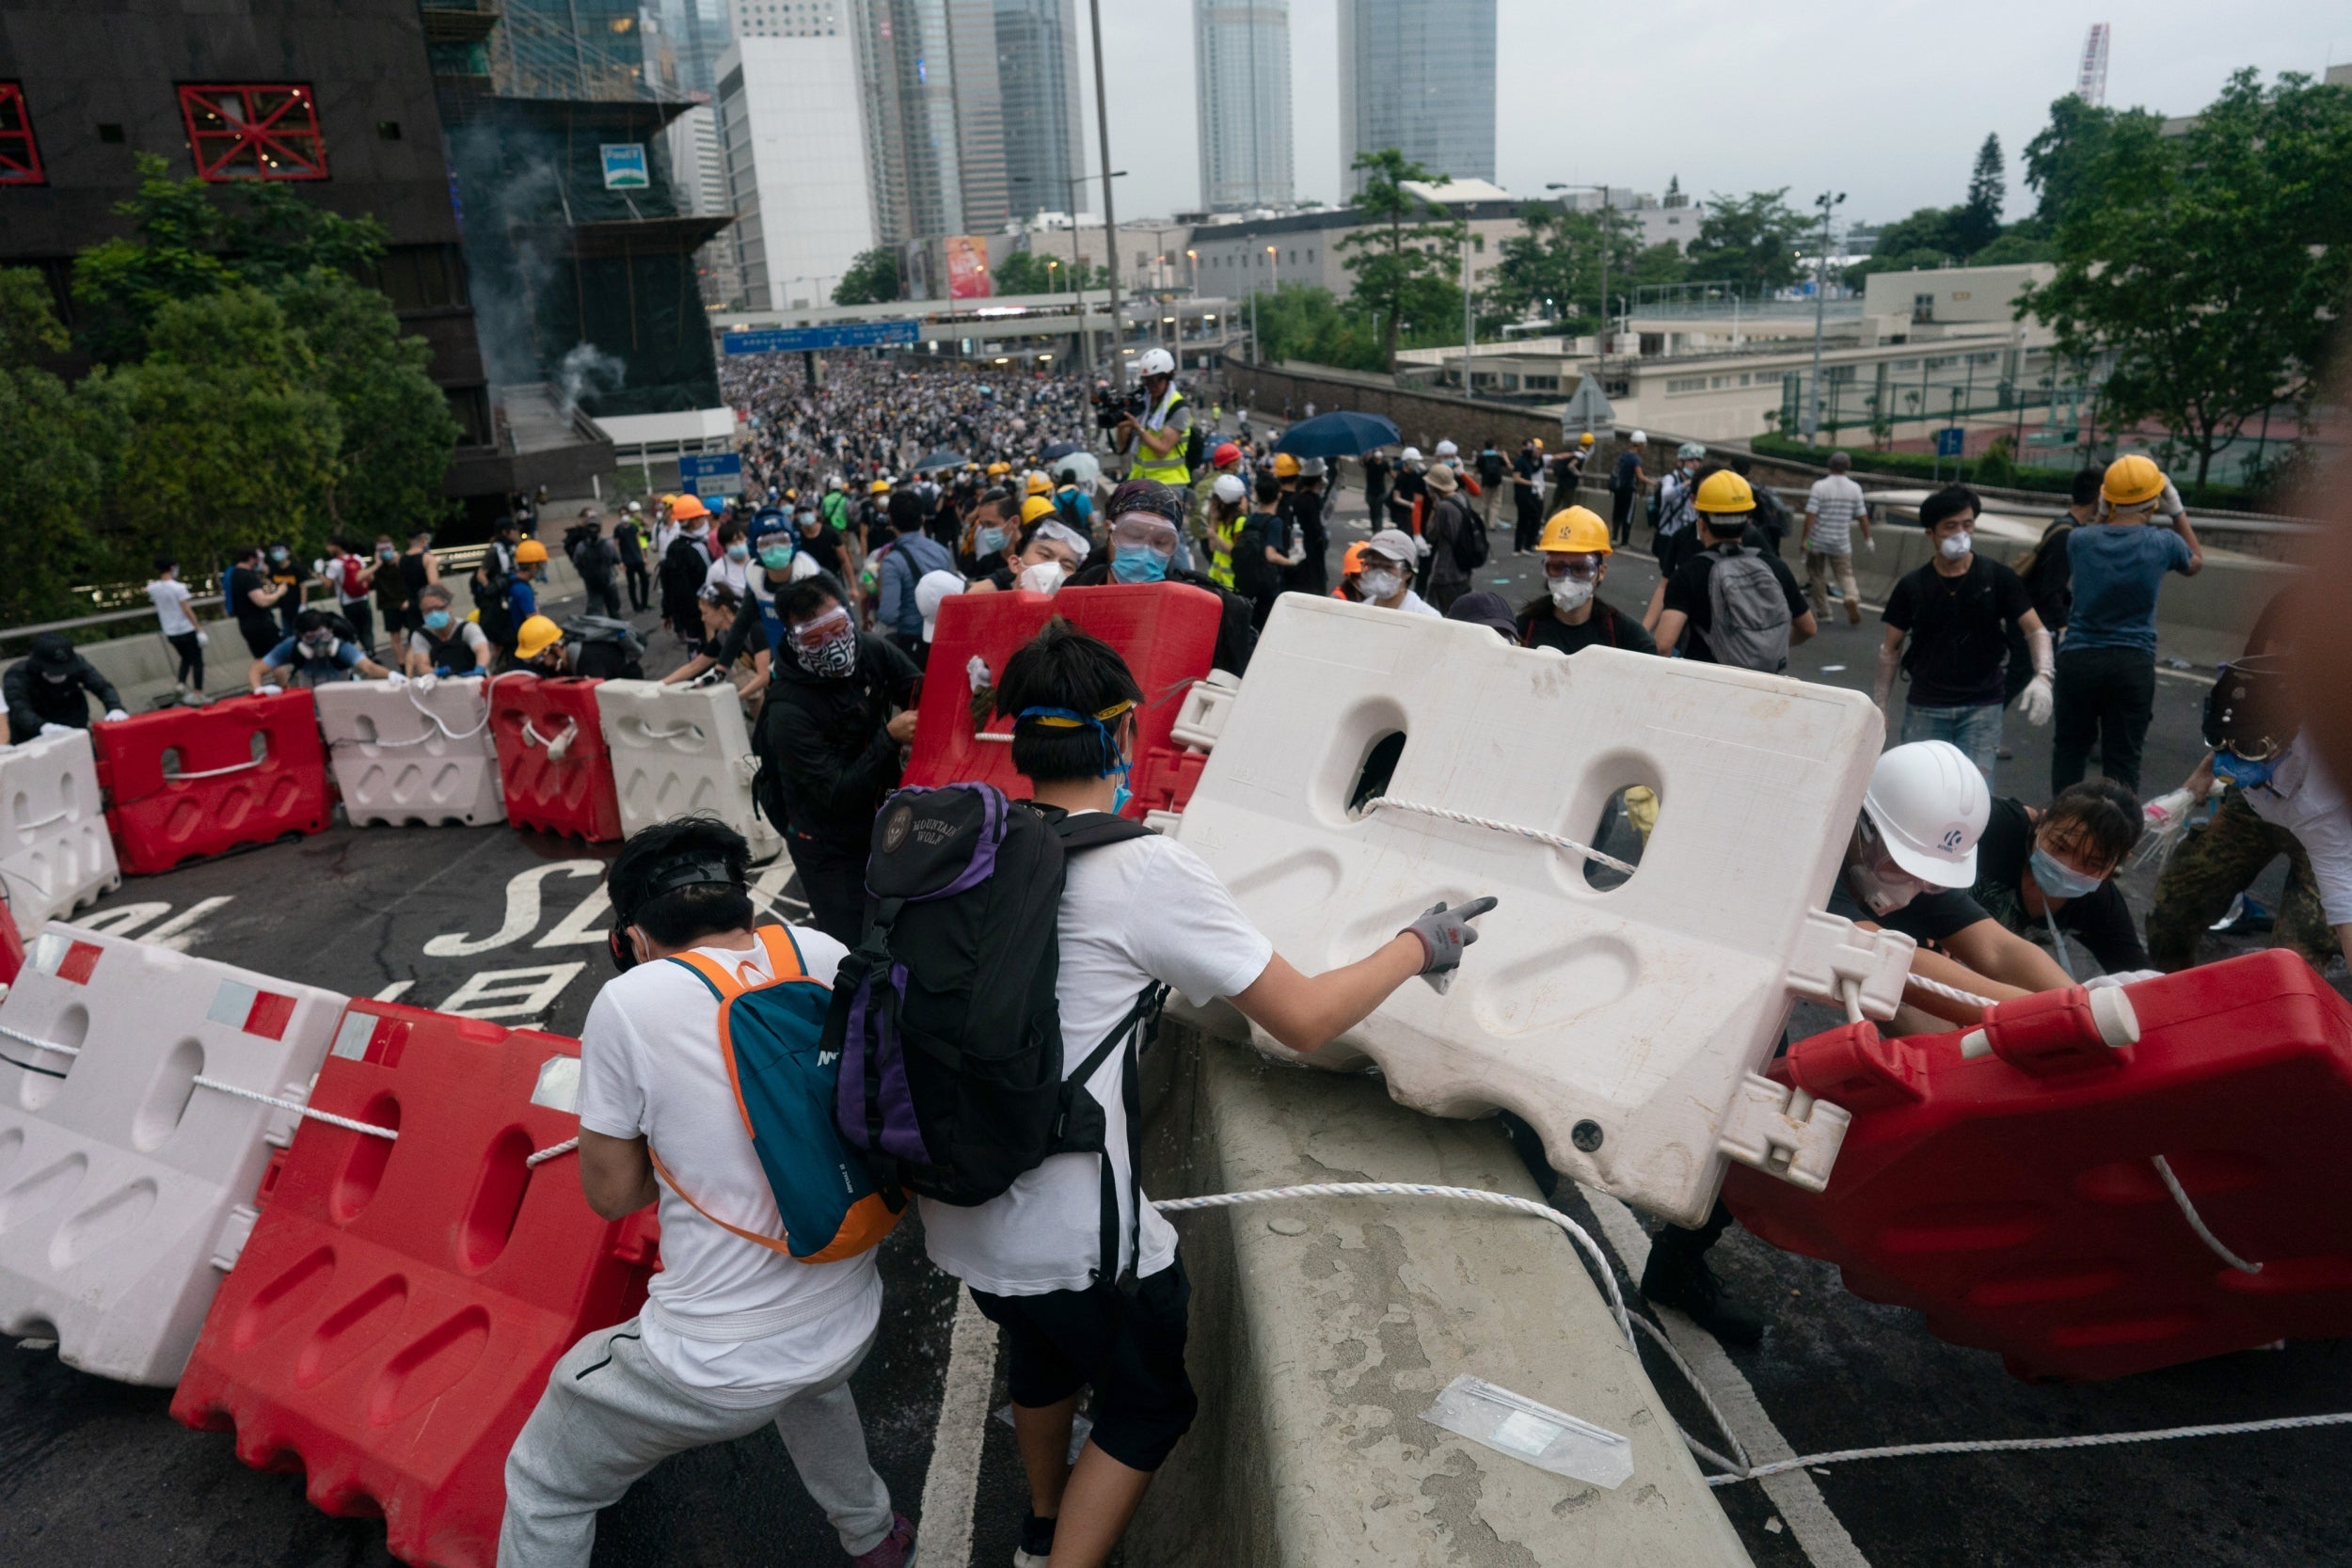 The Hong Kong protests could trigger unrest in mainland China